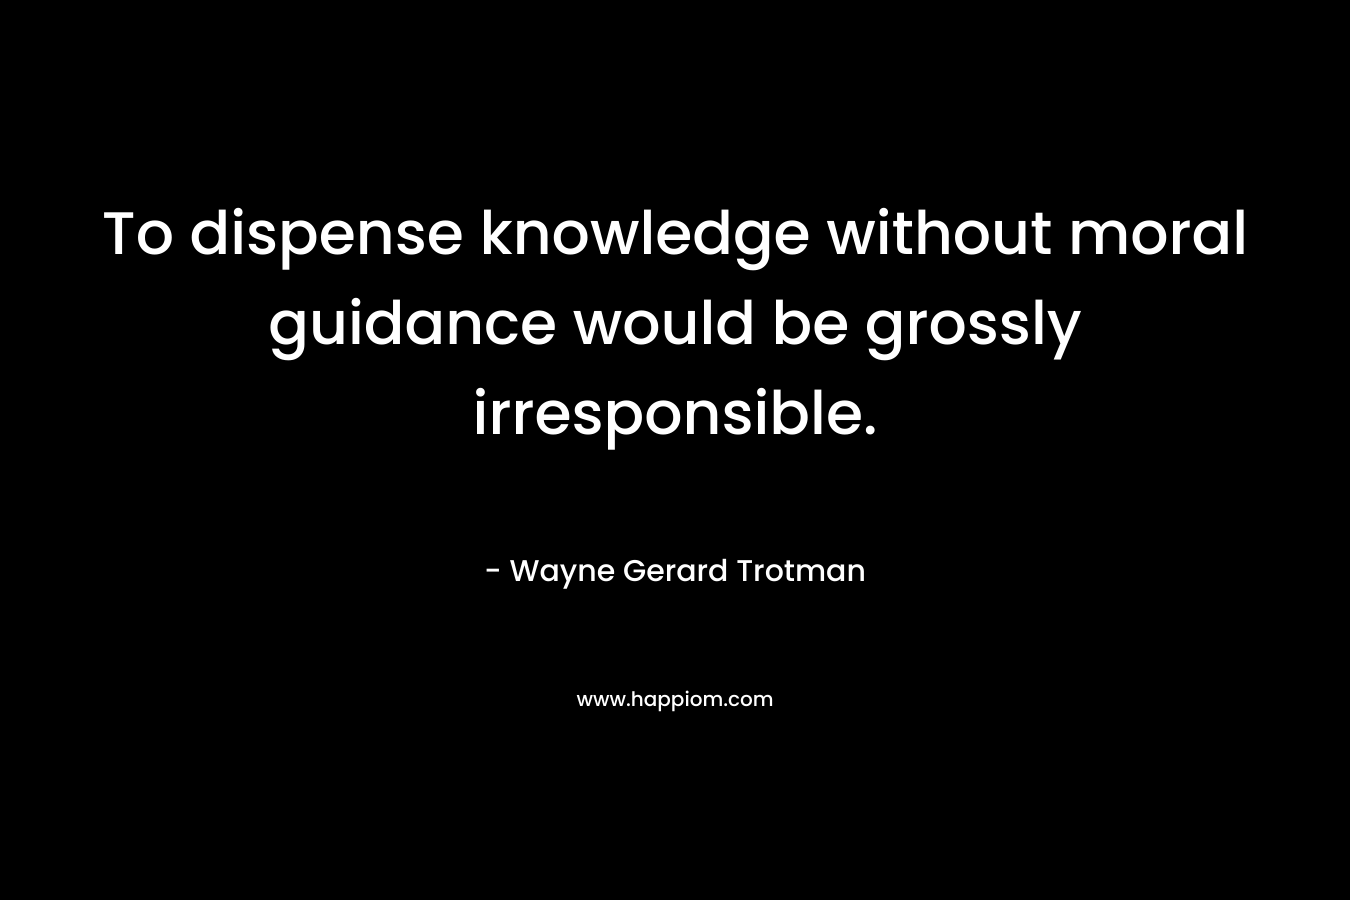 To dispense knowledge without moral guidance would be grossly irresponsible. – Wayne Gerard Trotman